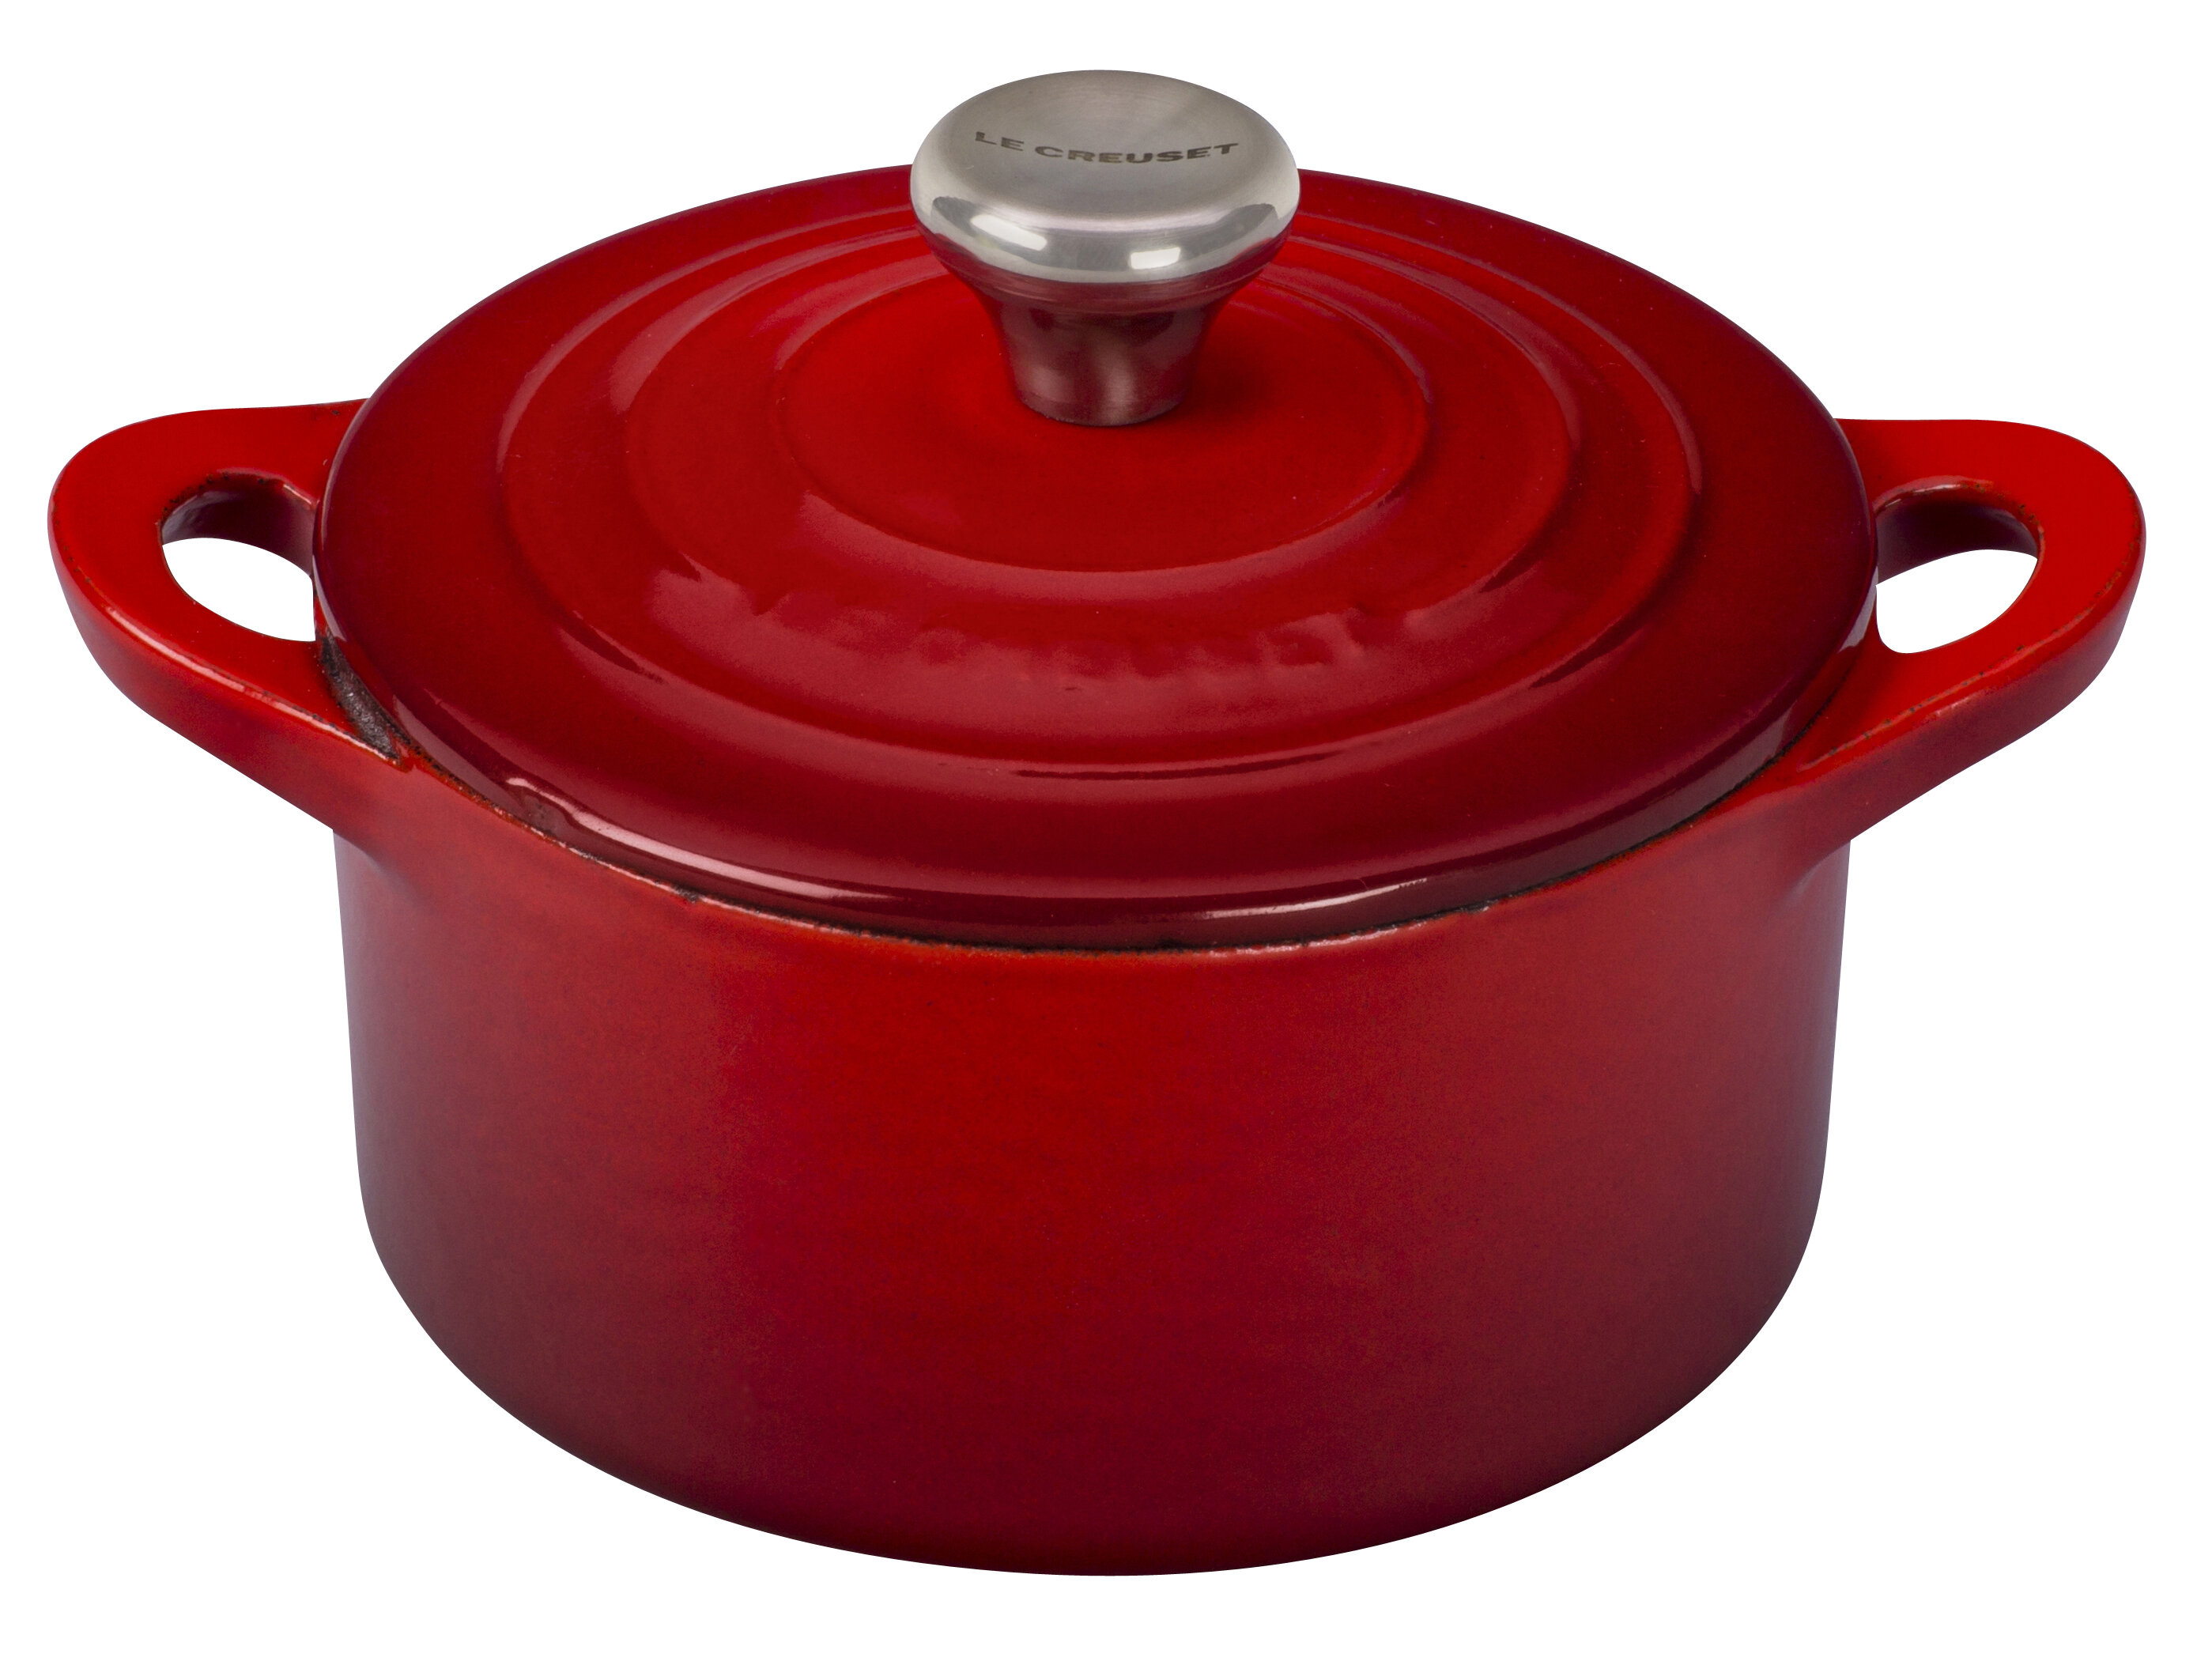 Can This $95 Dutch Oven Compare to a Le Creuset?